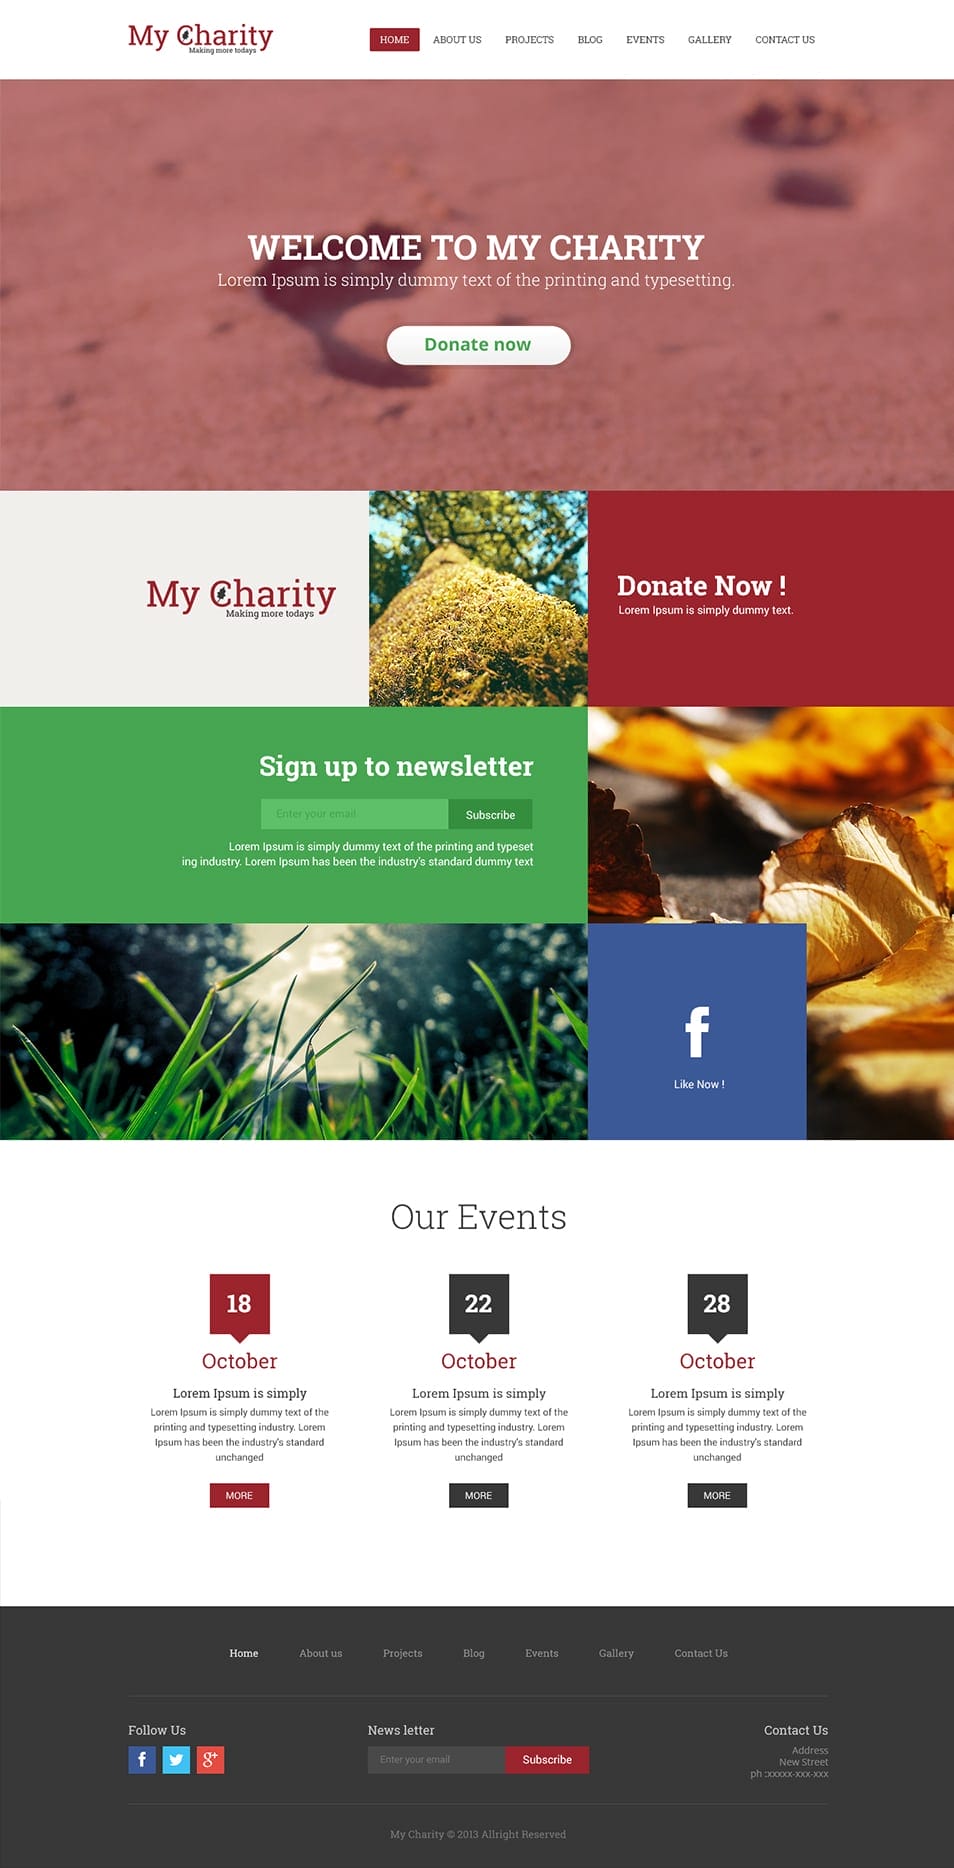 Download Charity Website Template PSD › Free Web Templates » CSS Author